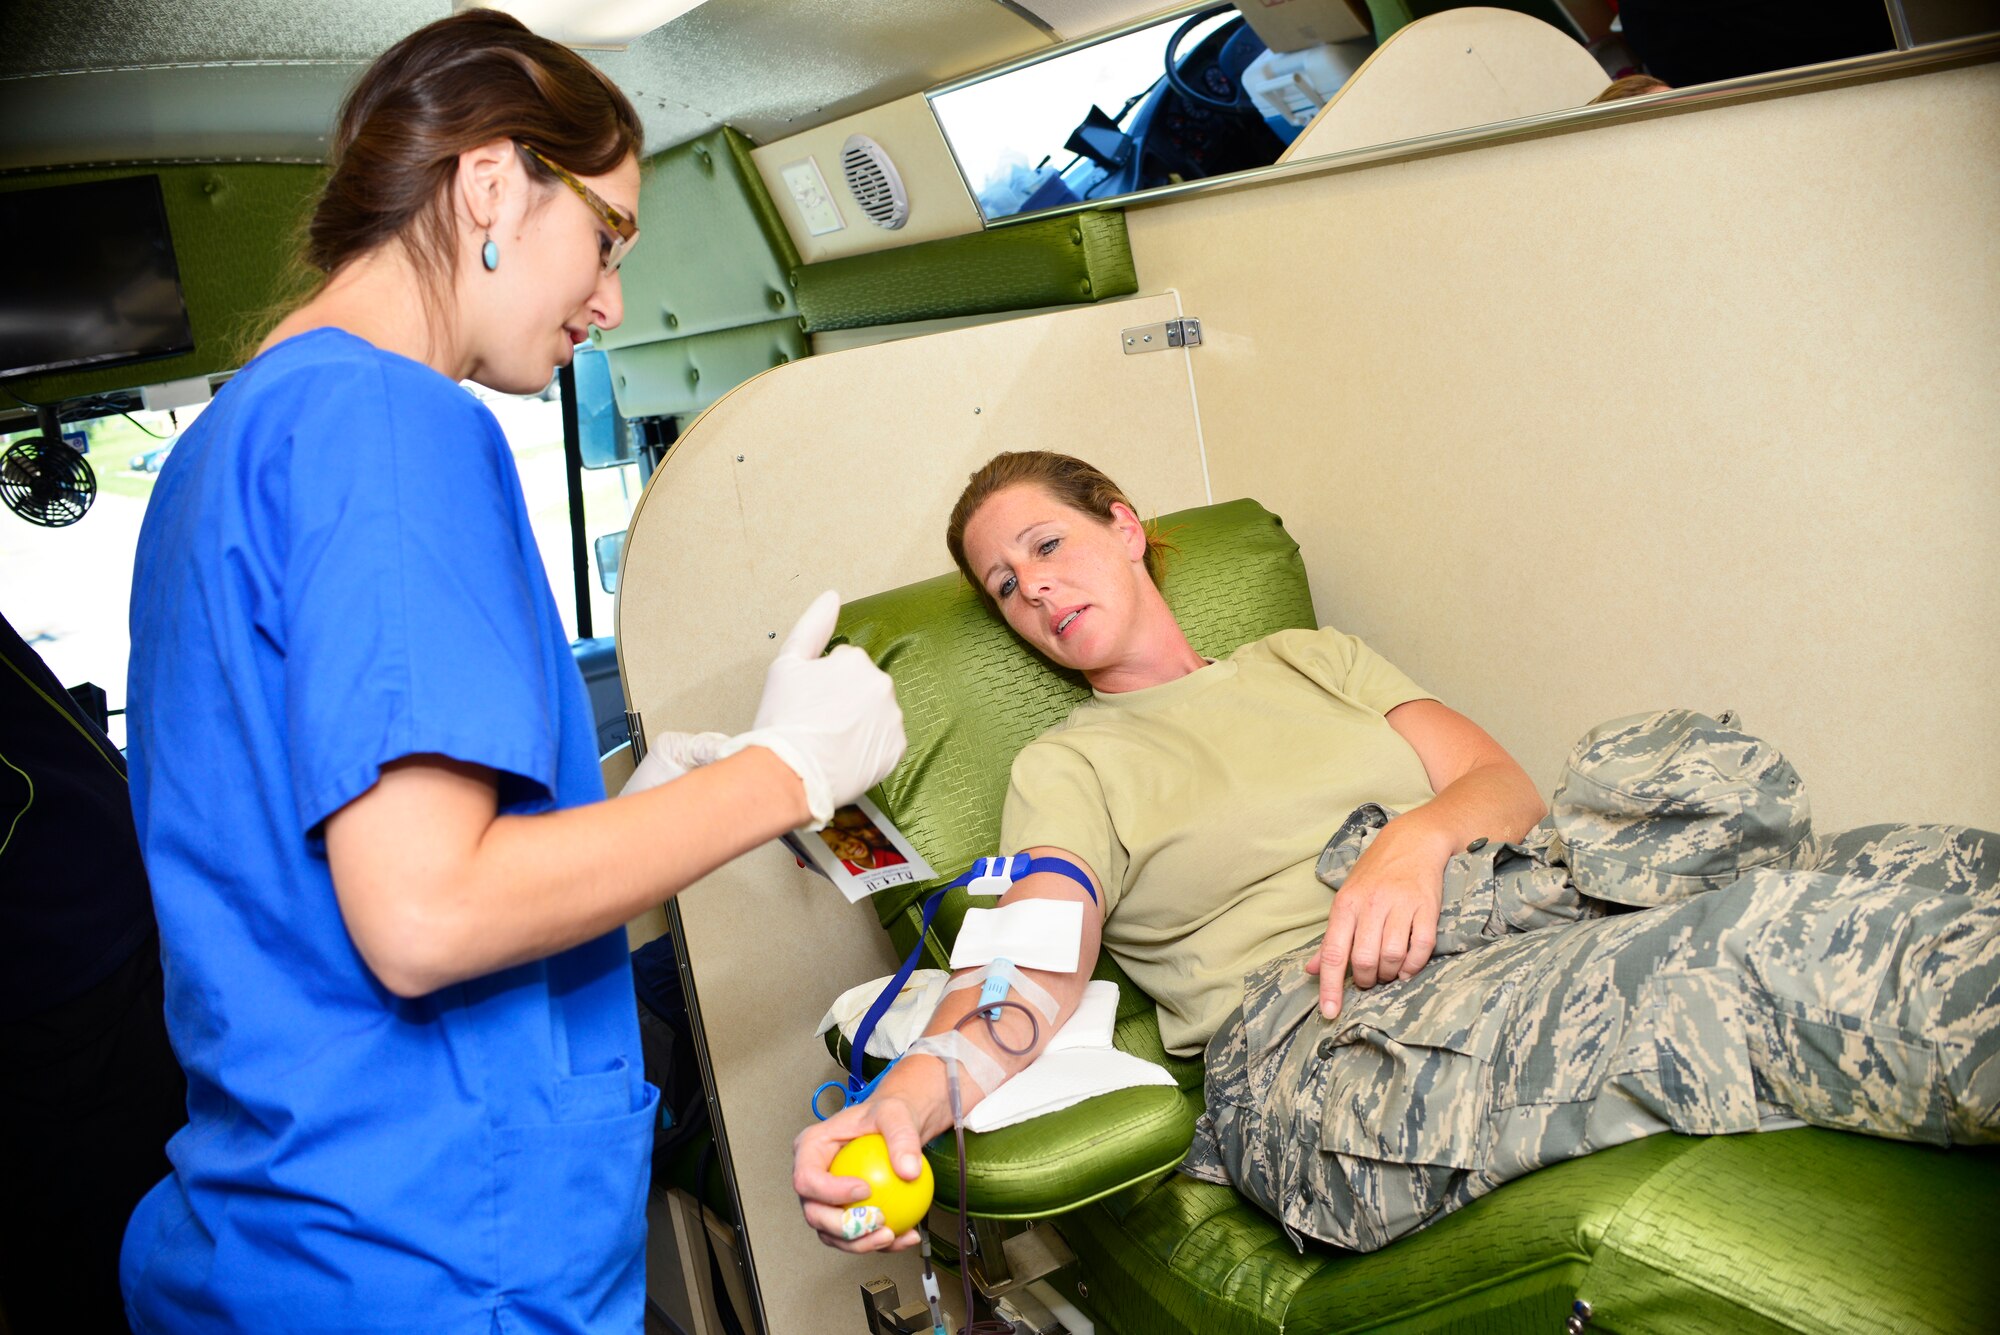 Tech Sgt. Amy Dowdall, 914th Force Support Squadron, donates blood to Upstate New York Transplant Services (UNYTS), September 7, 2014, Niagara Falls Air Reserve Station, N.Y. Dowdall's donation will save up to three lives in the Western N.Y. area. (U.S. Air Force photo by Staff Sgt. Stephanie Sawyer) 